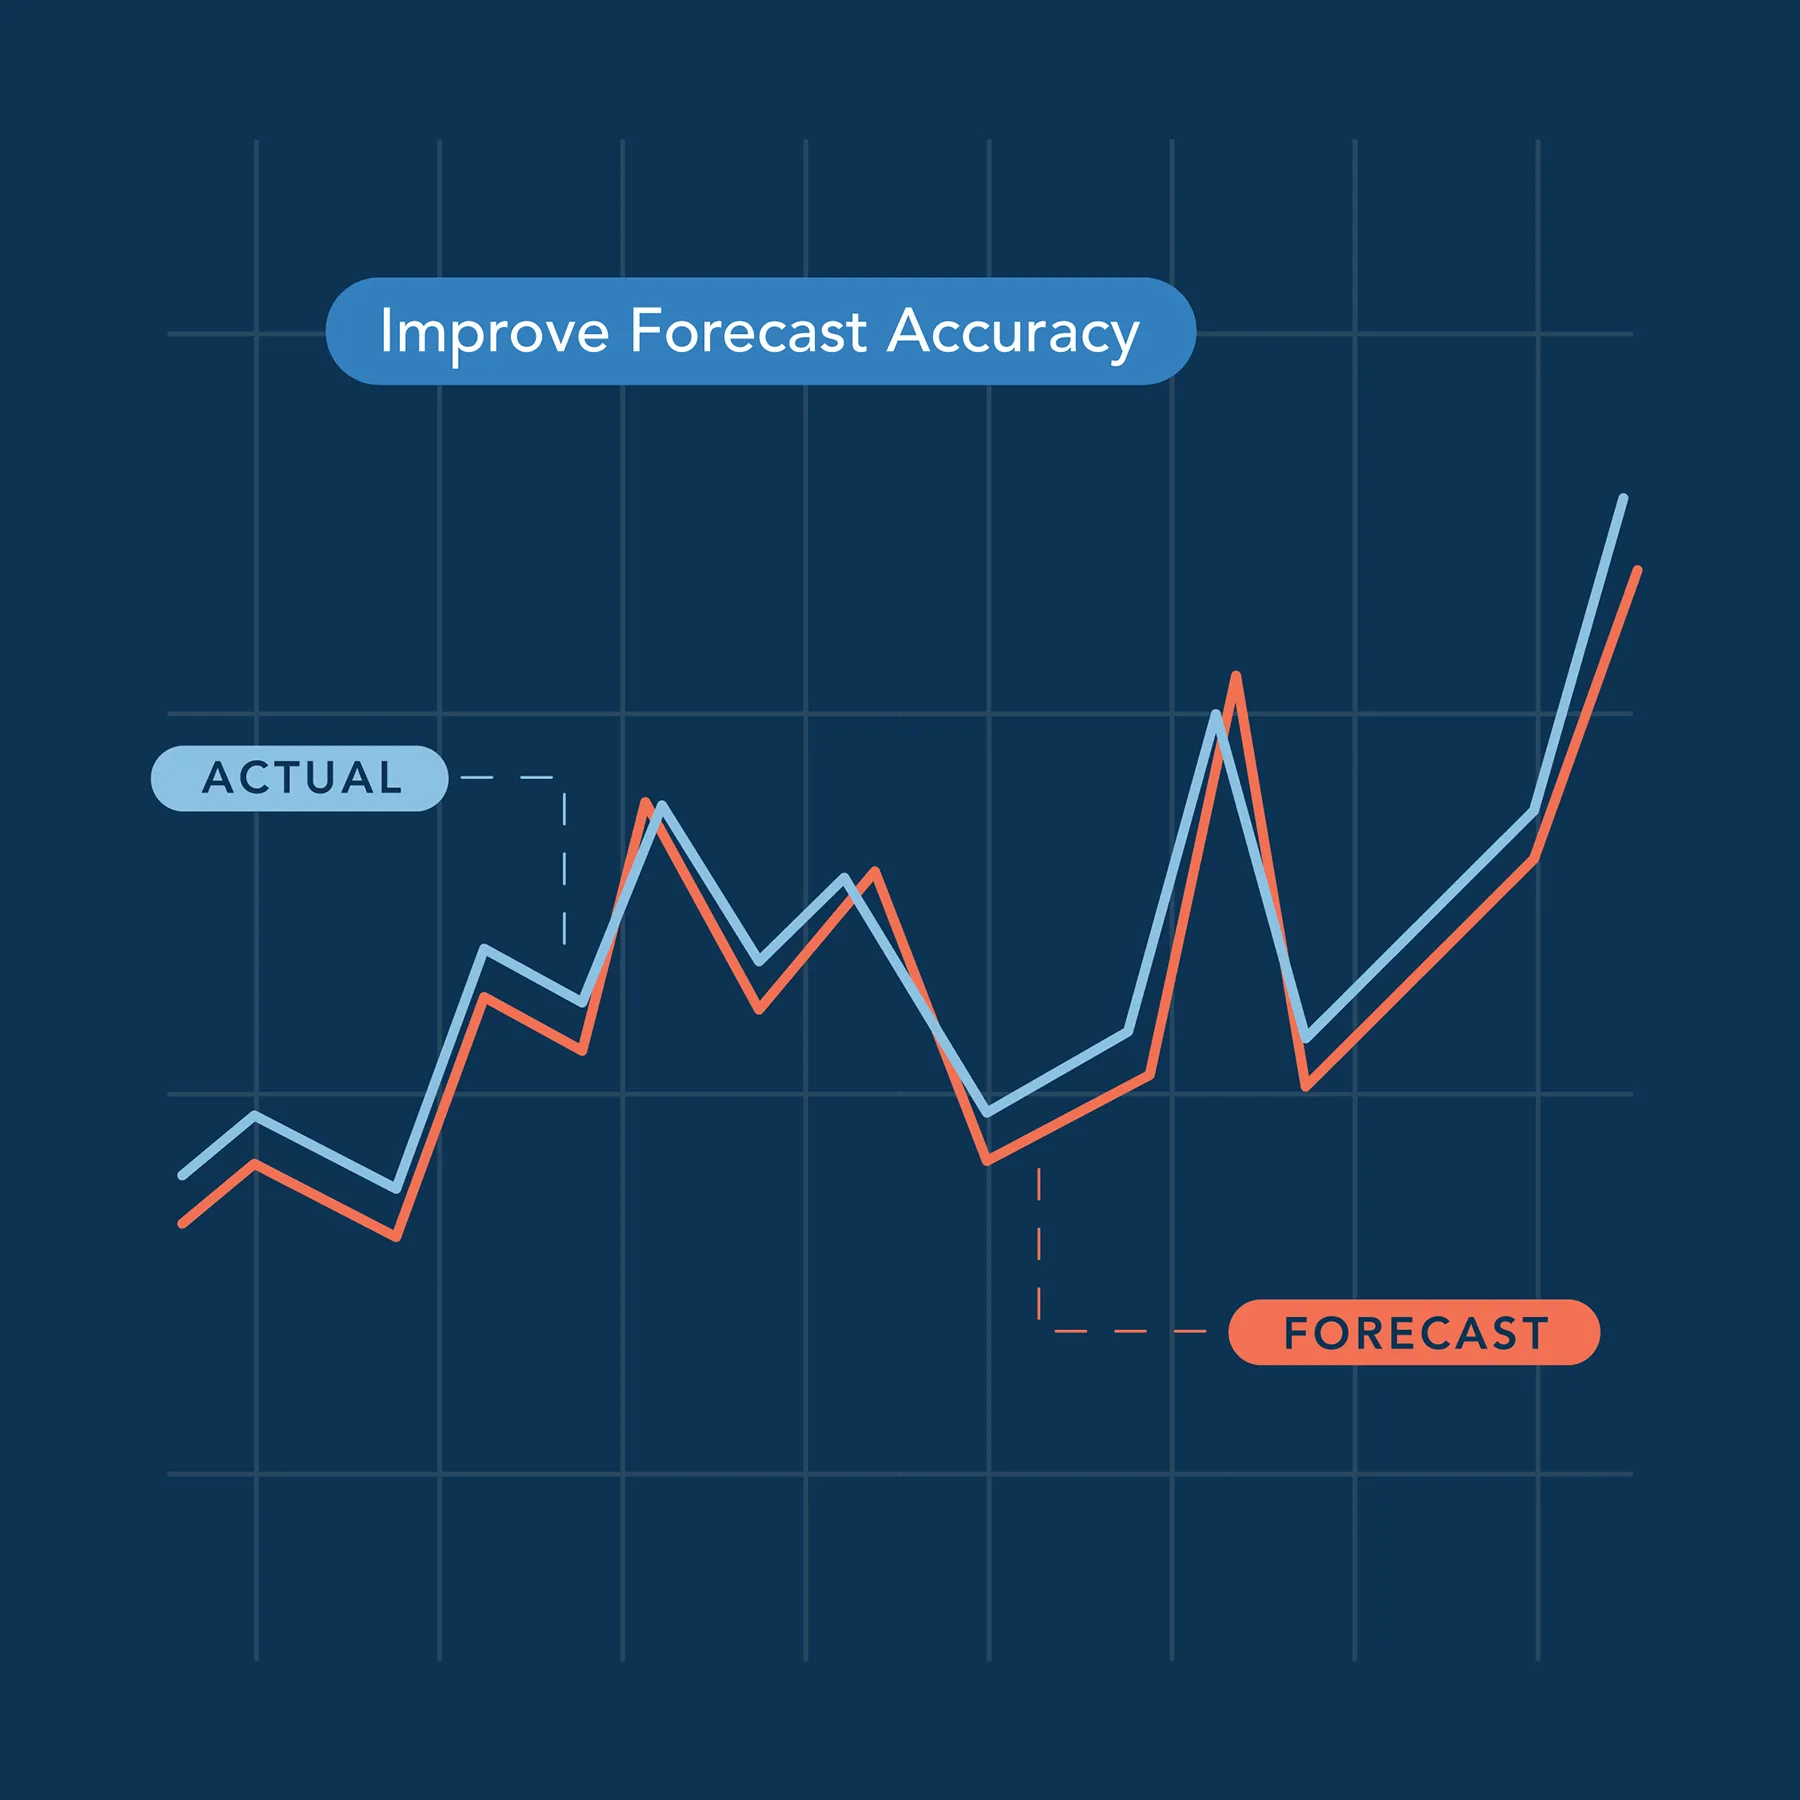 A chart showing the increase in forecast accuracy.